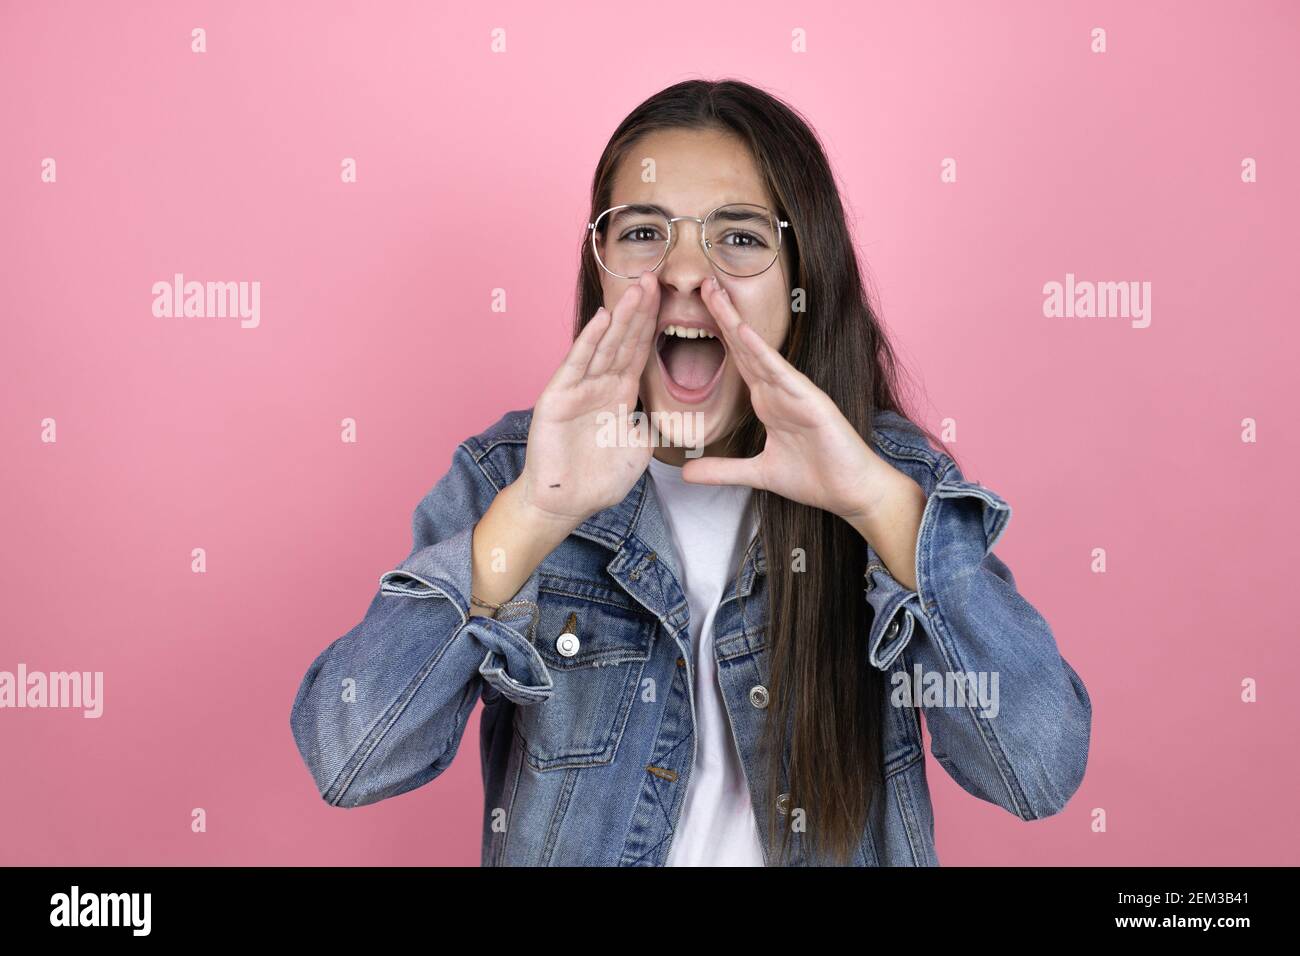 Beautiful child girl with long hair wearing a denim jacket standing over isolated pink background shouting and screaming loud to side with hands on mo Stock Photo